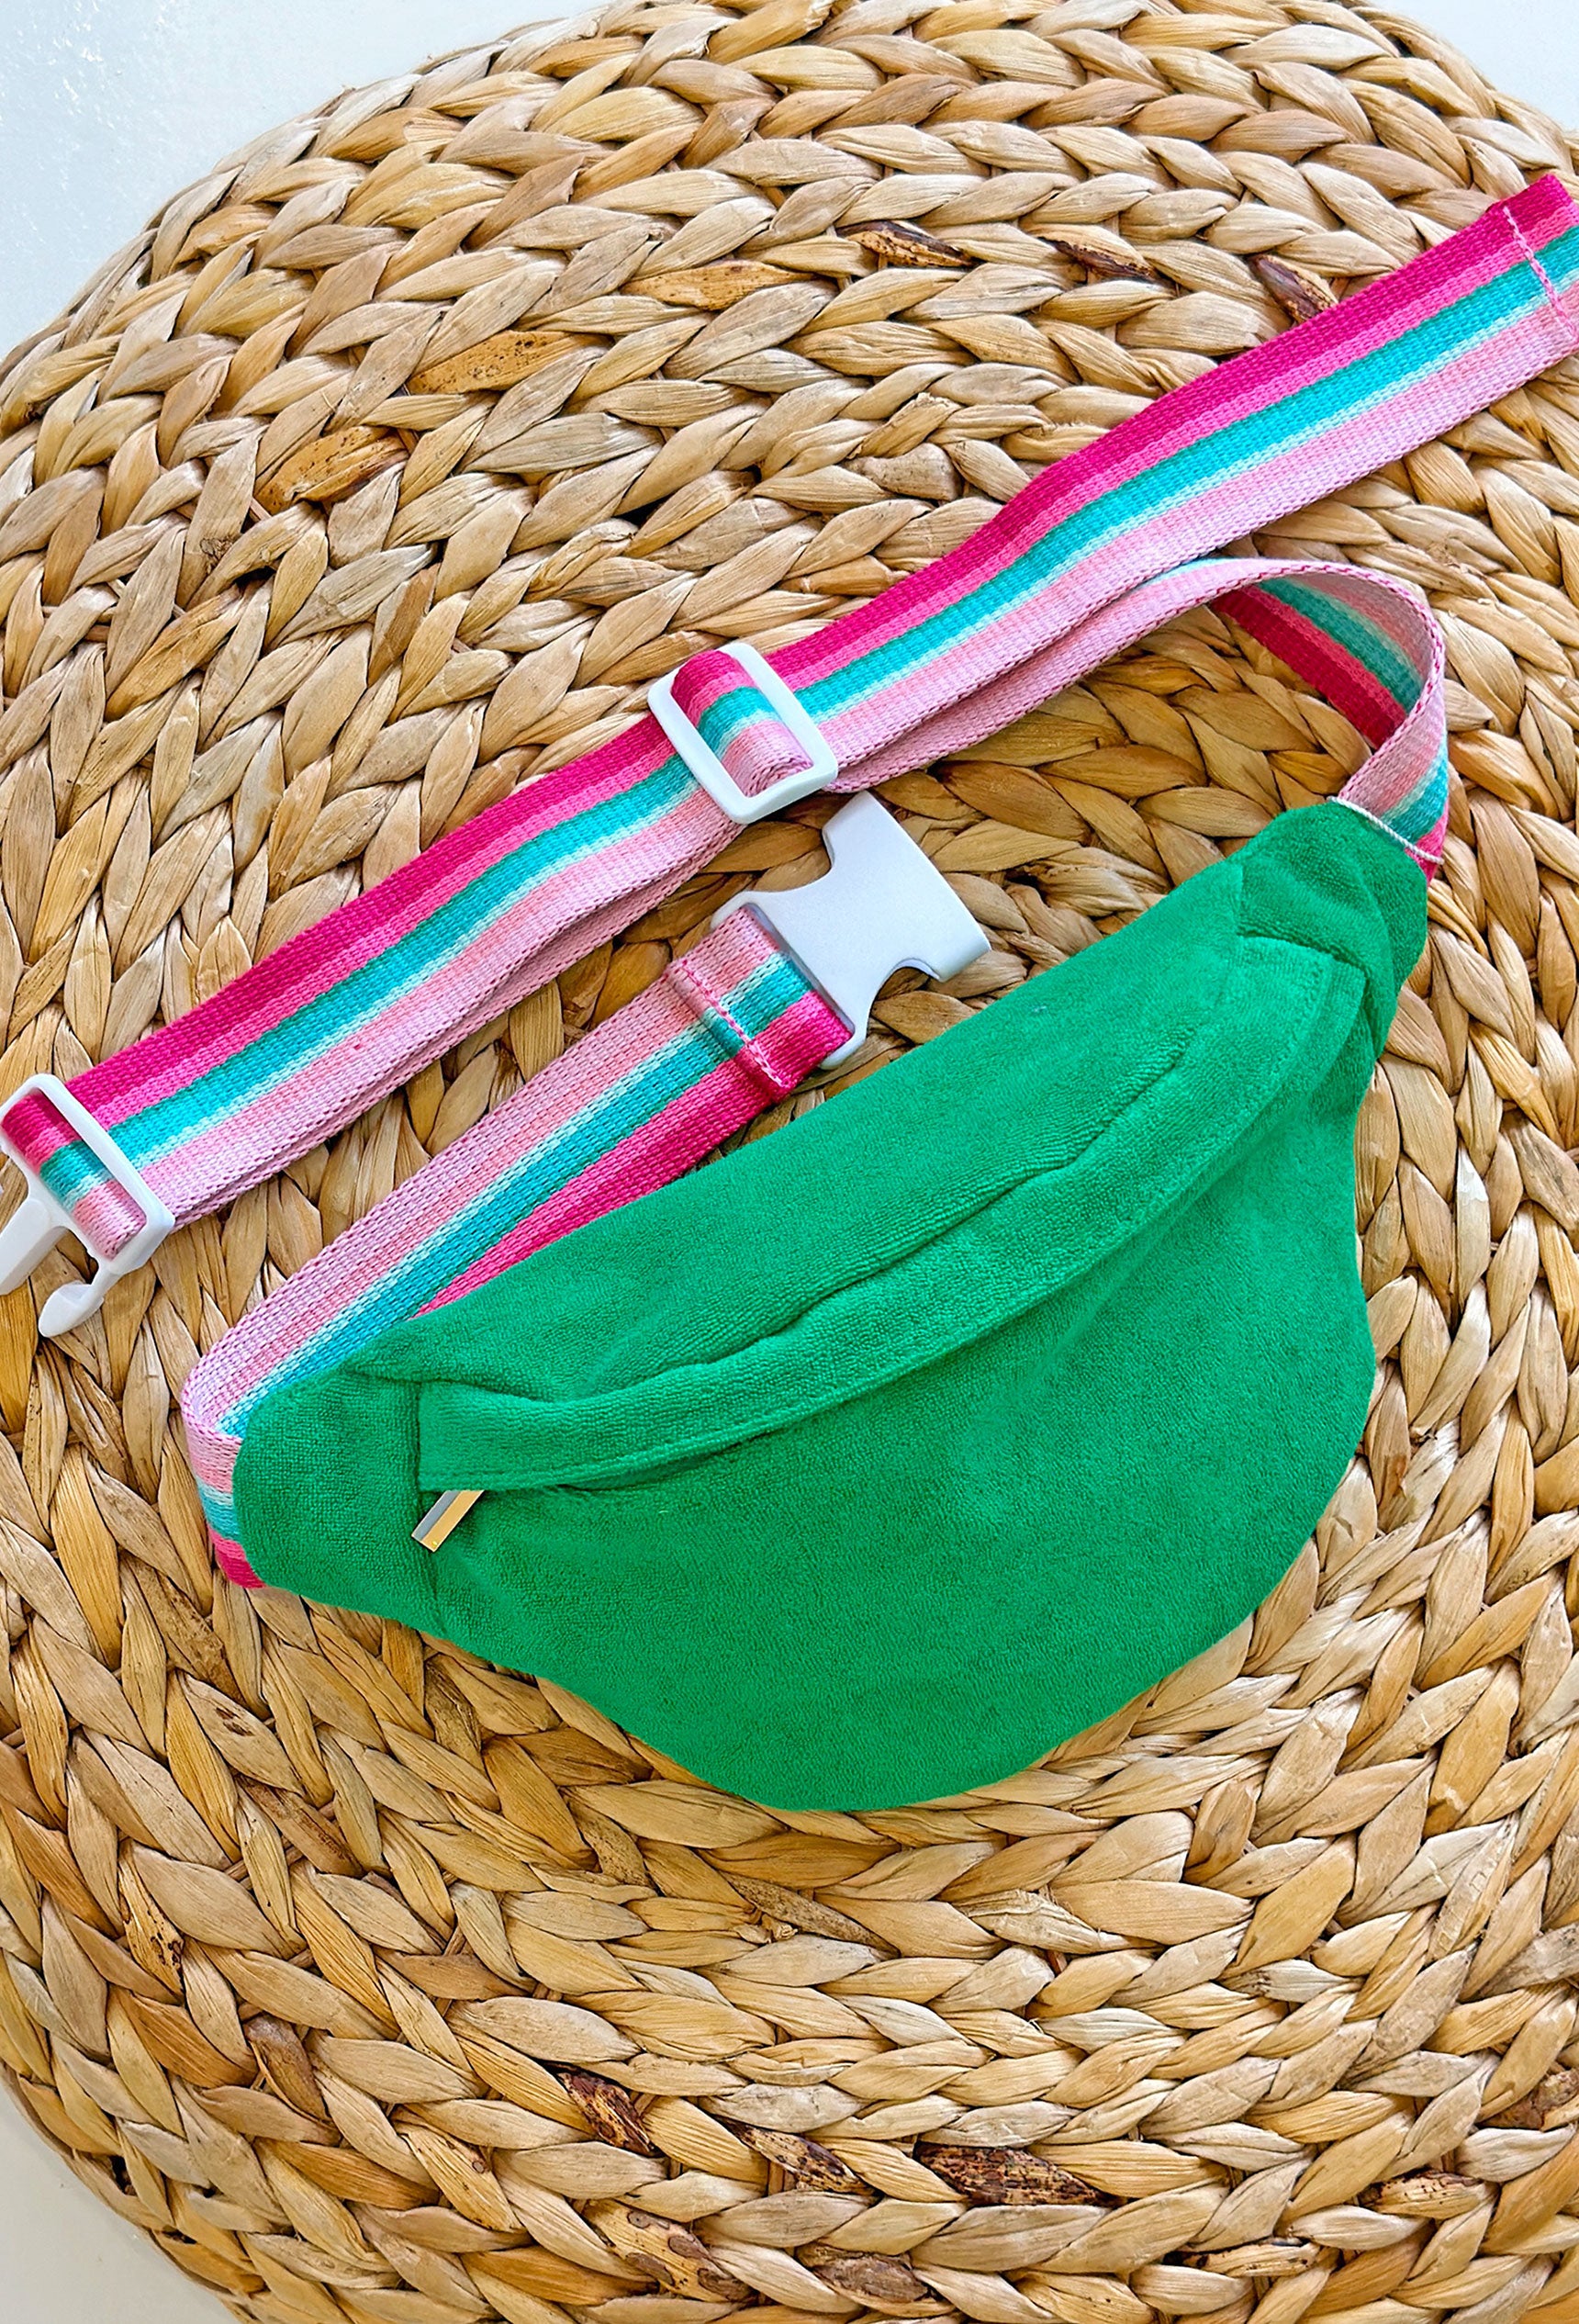 Avery Belt Bag in Green, pink belt bag with rainbow strap and clip closure